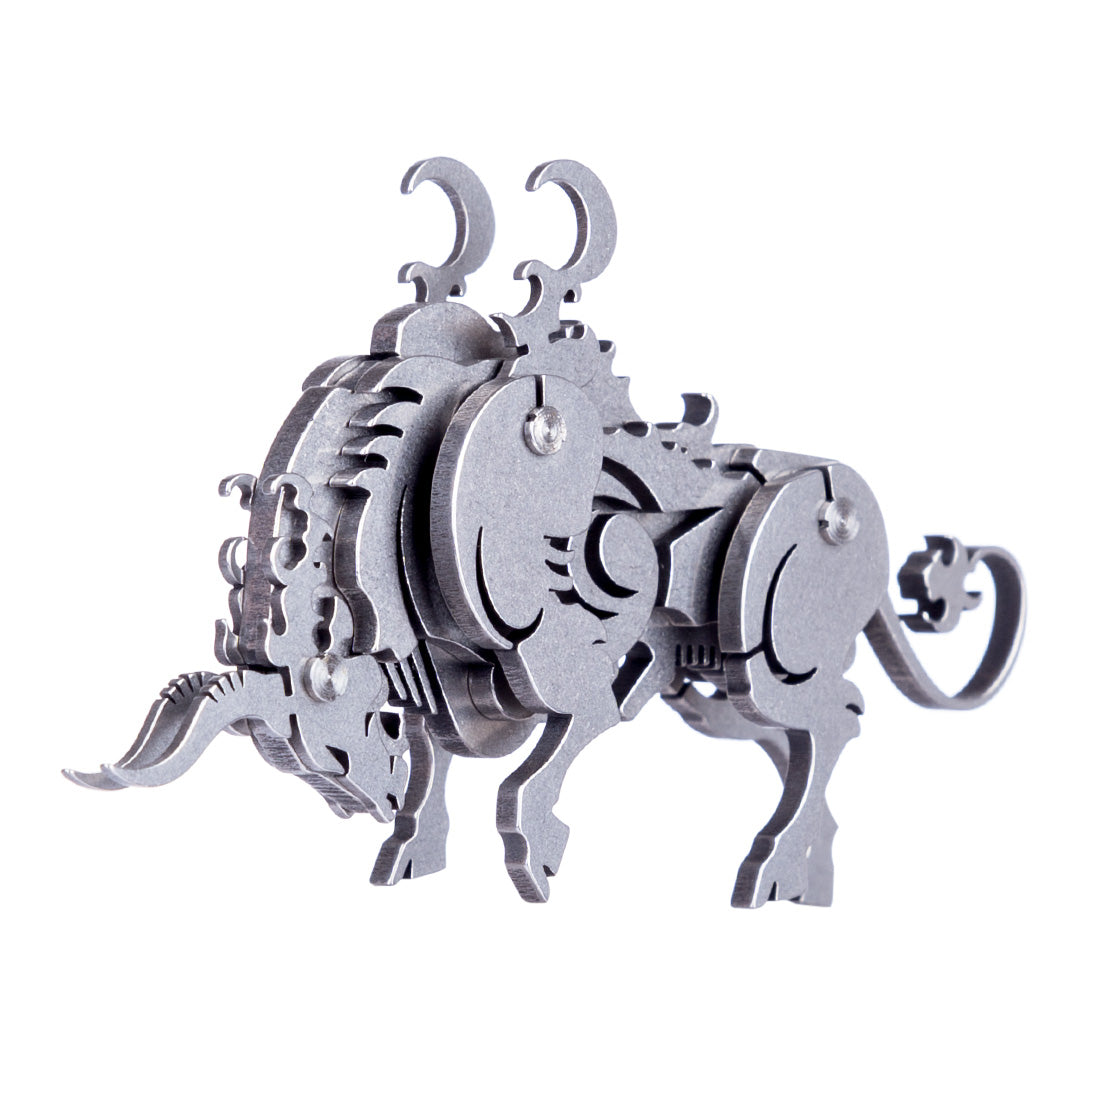 4PCS Griffin Wild Wolf Cattle Horse DIY 3D Stainless Steel Metal Puzzle Model